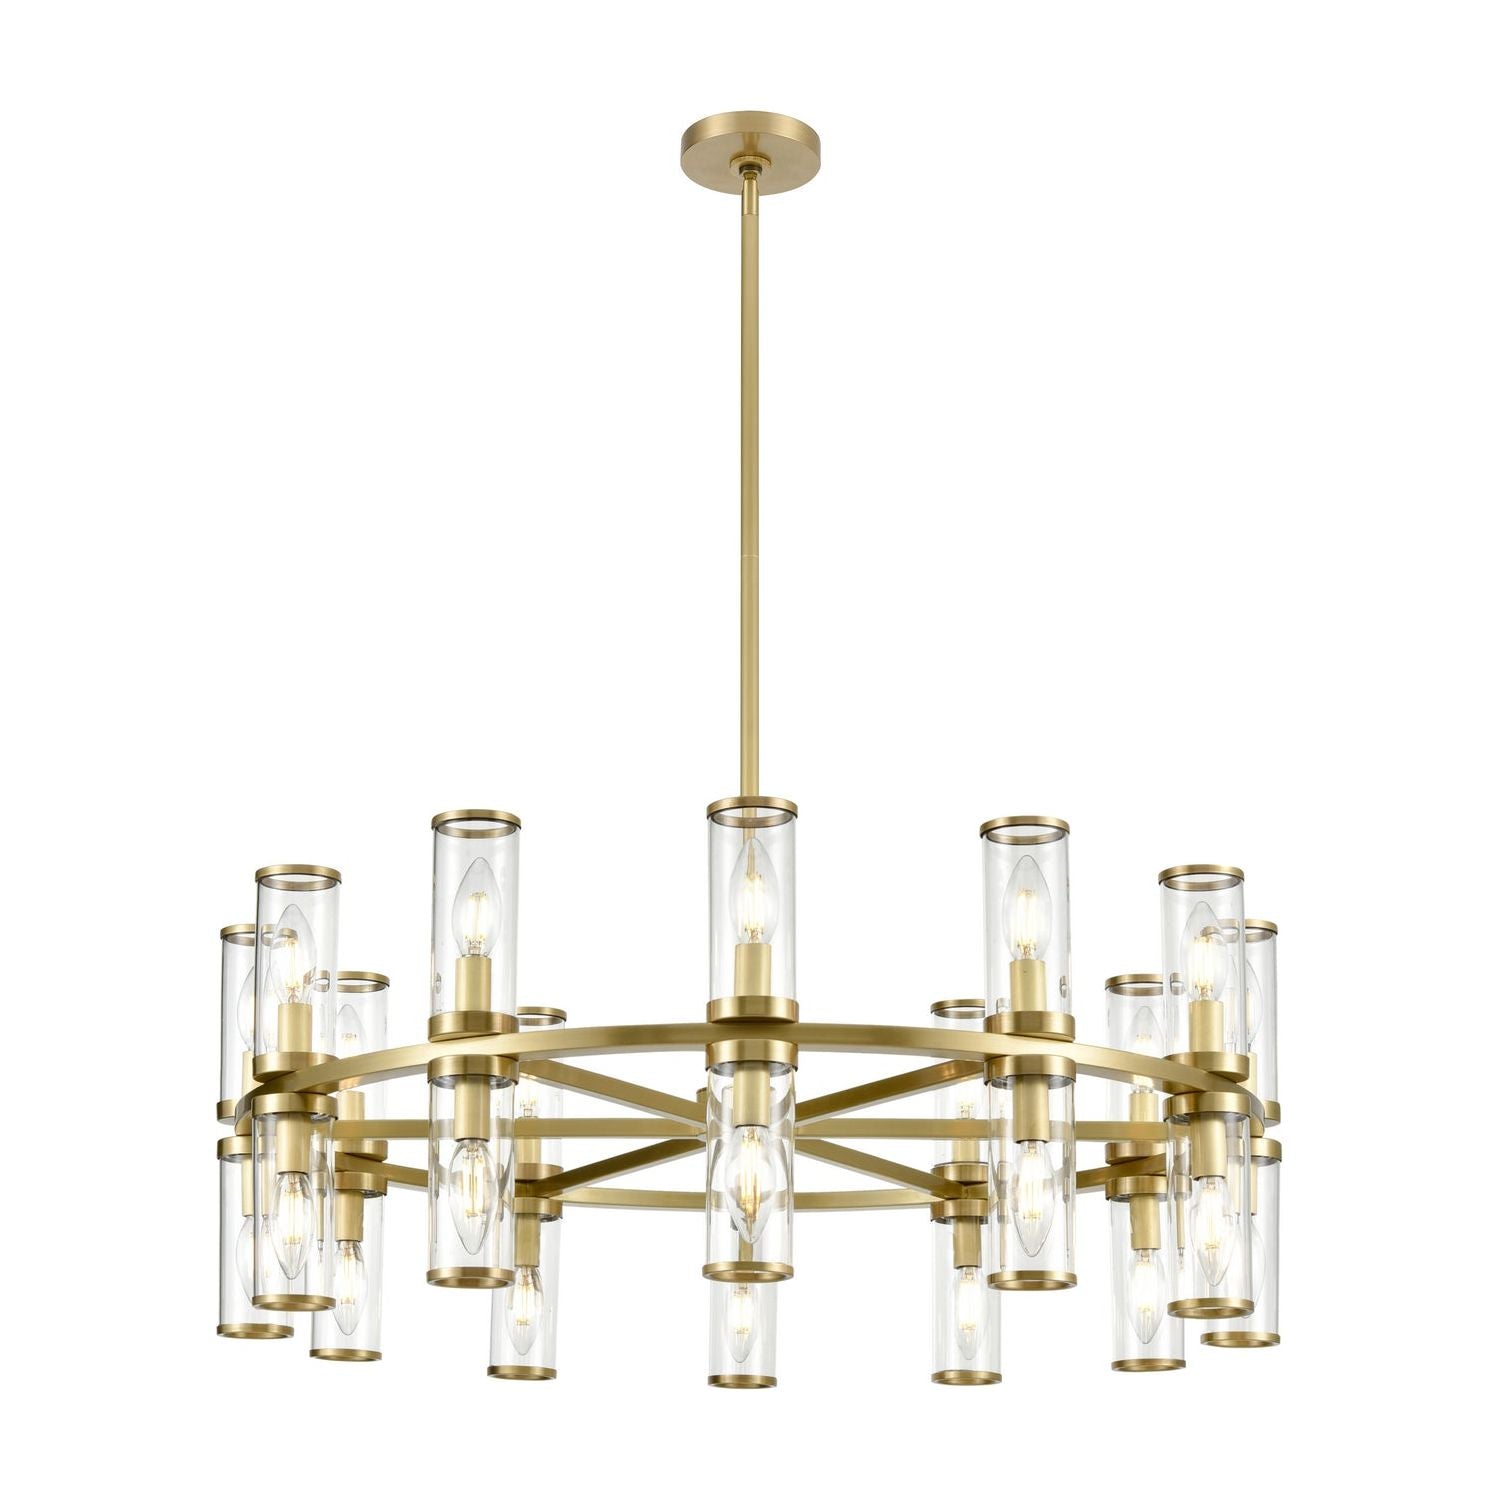 Alora Lighting - CH309024NBCG - 24 Light Chandelier - Revolve - Clear Glass/Natural Brass|Clear Glass/Polished Nickel|Clear Glass/Urban Bronze